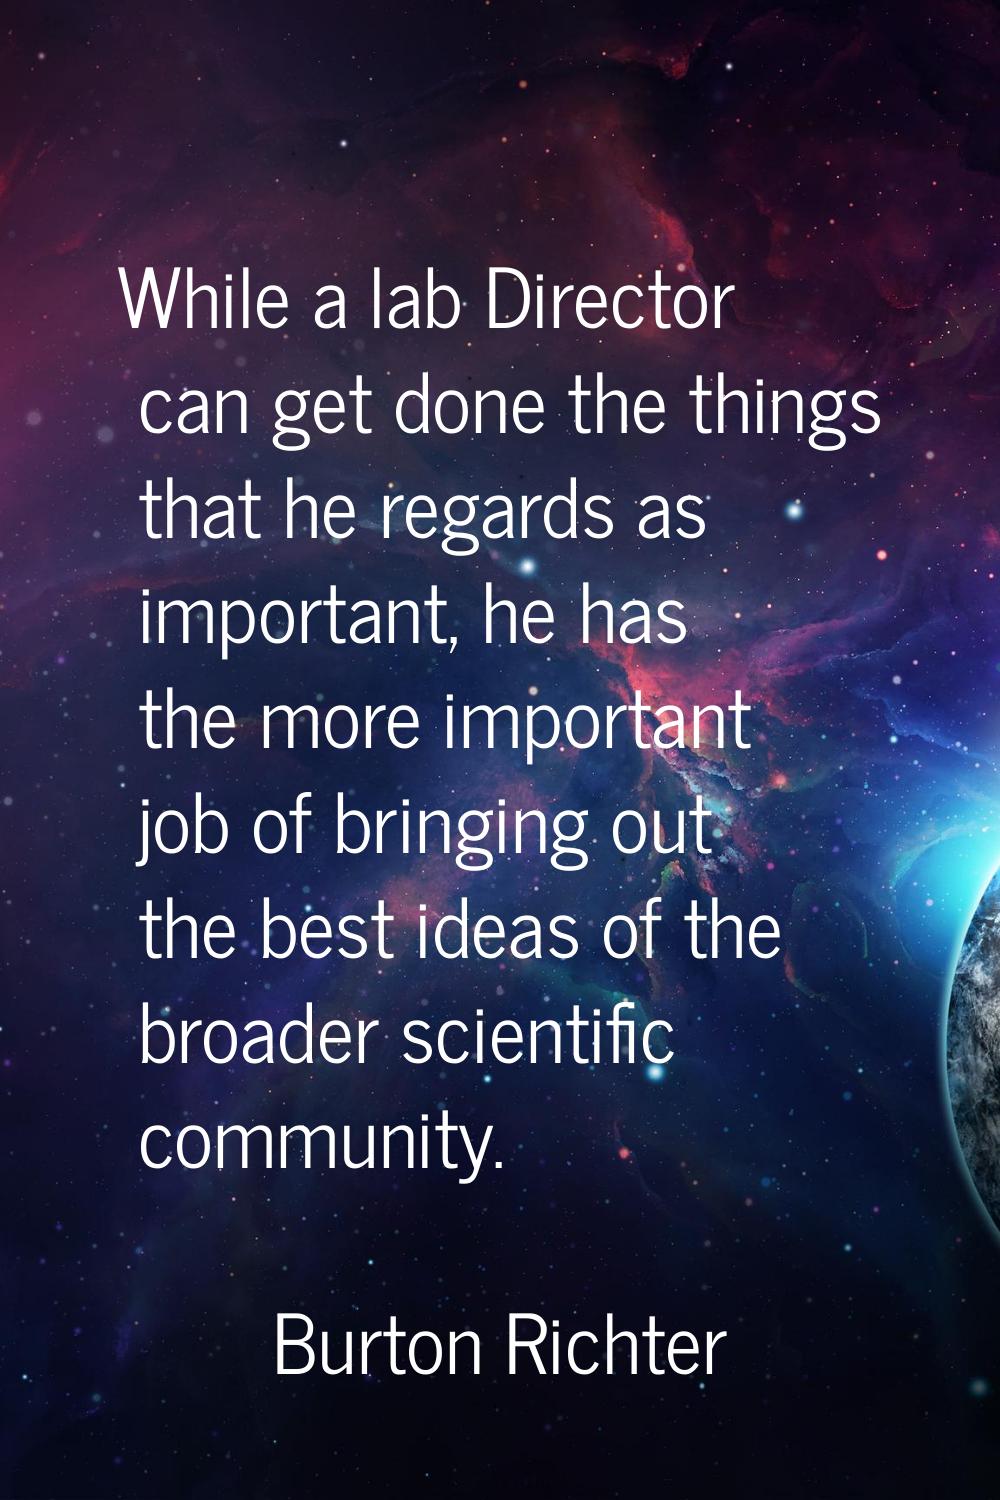 While a lab Director can get done the things that he regards as important, he has the more importan